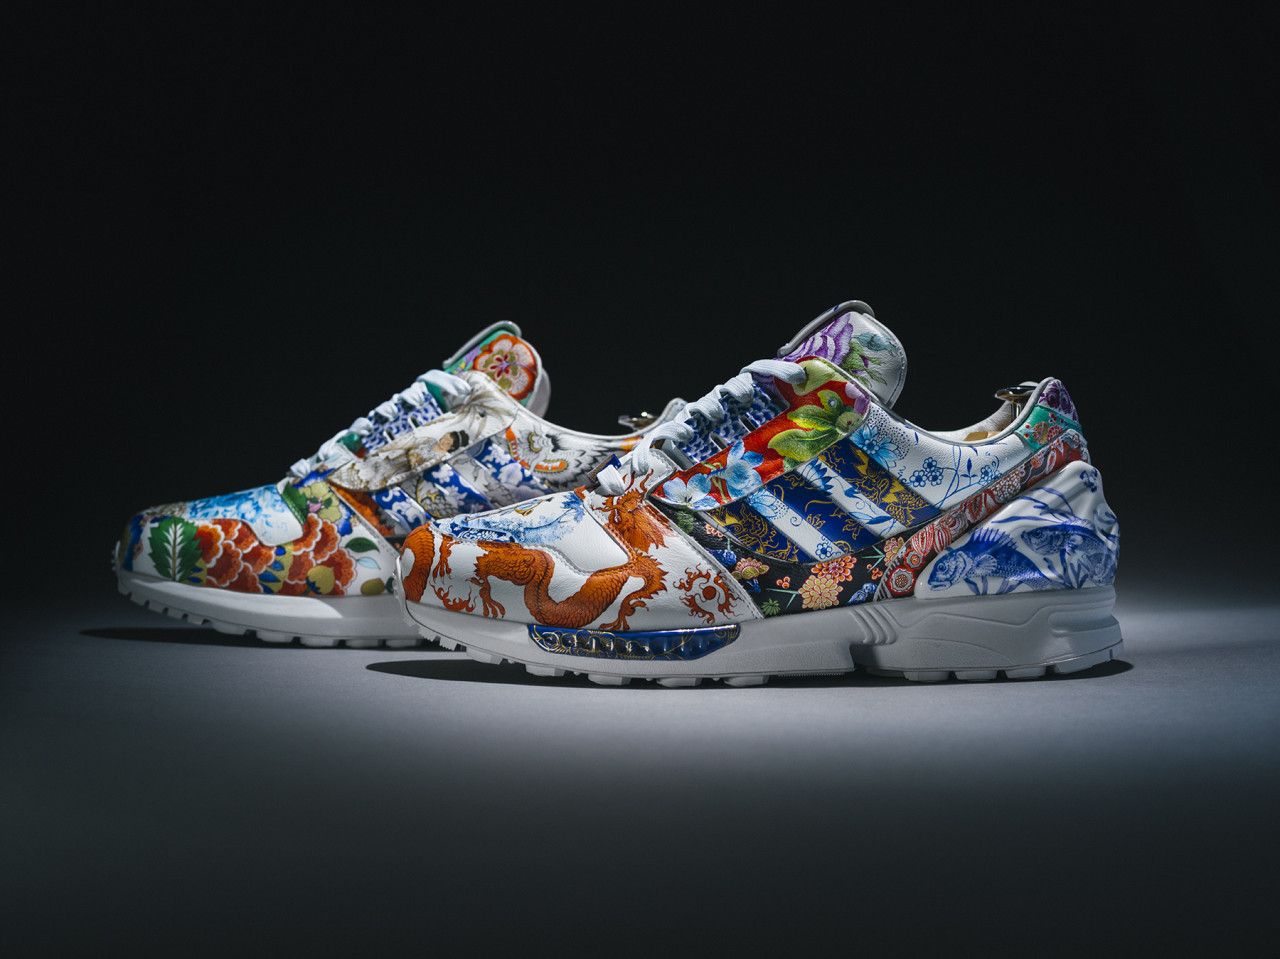 The Hand-Painted Meissen x adidas ZX8000 Porcelain Sneaker